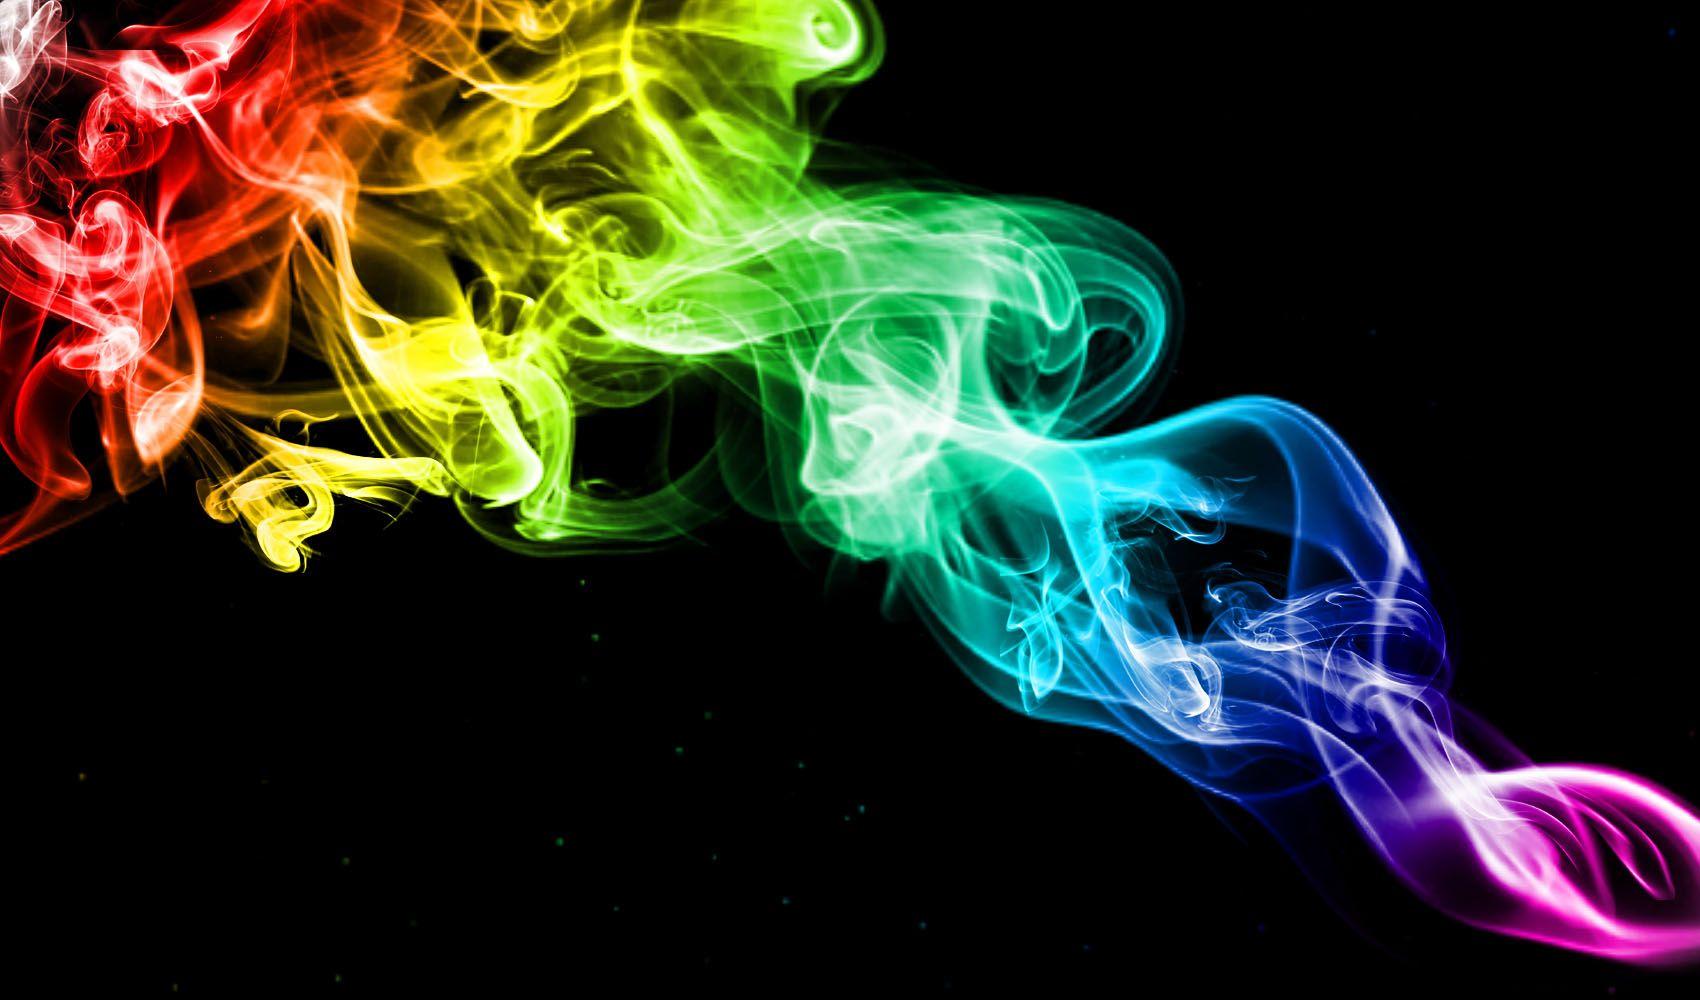 image For > Rainbow Smoke And Black Background. Rainbow Is